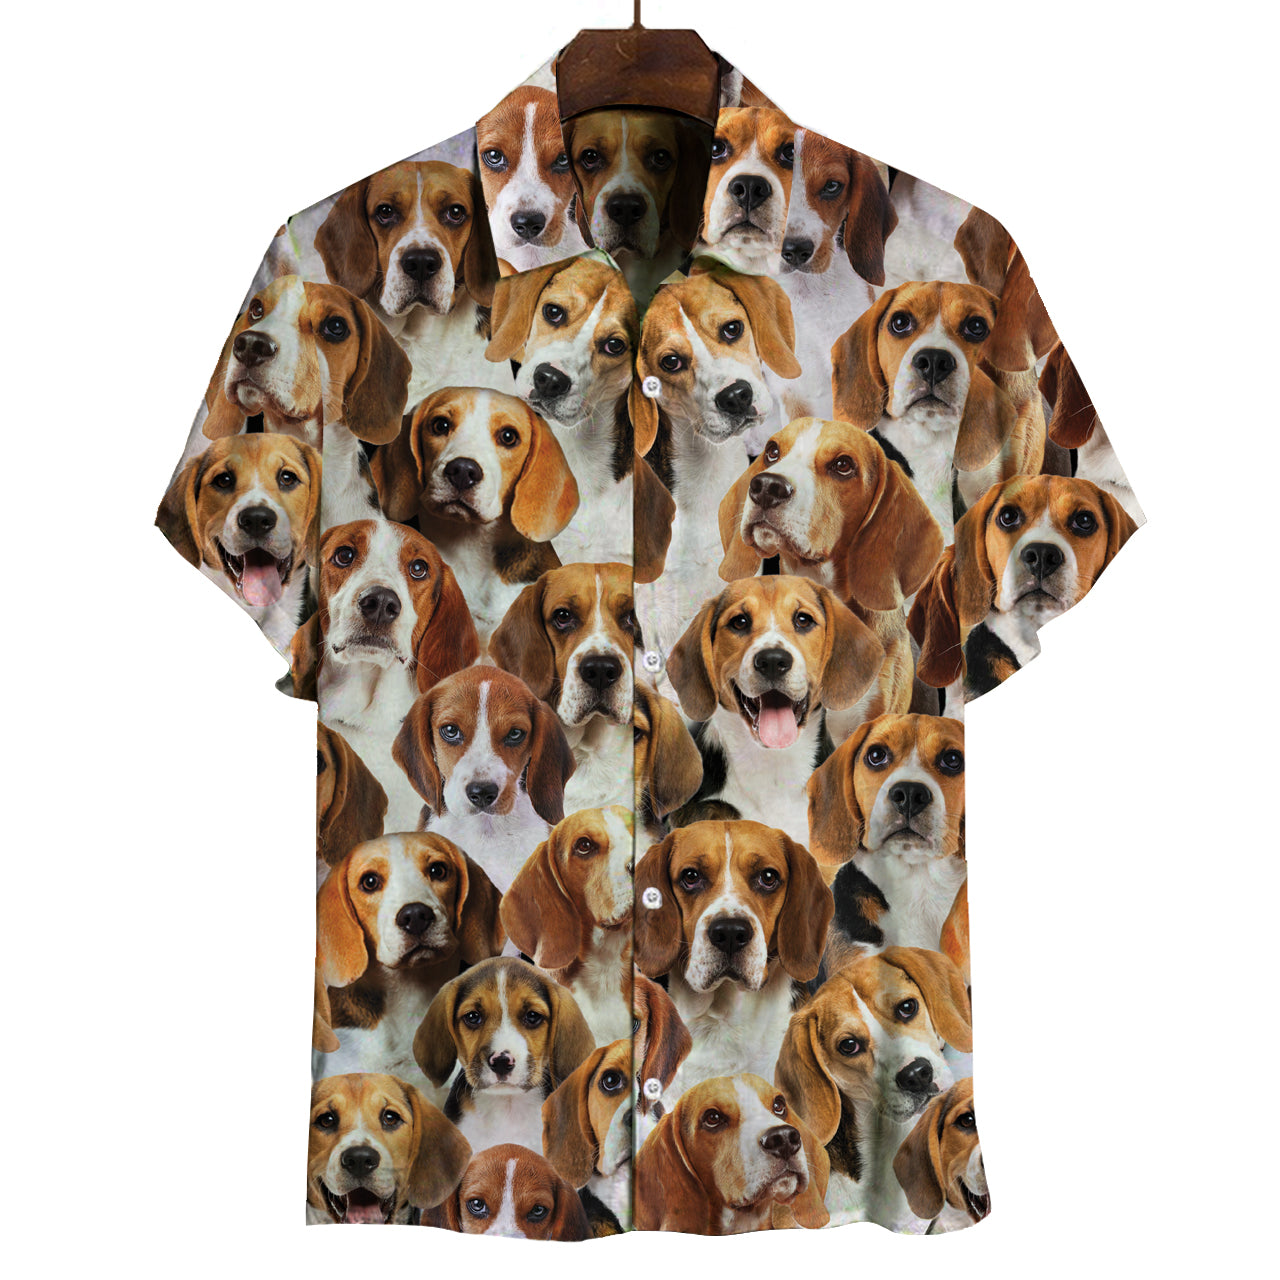 You Will Have A Bunch Of Beagles - Shirt V1